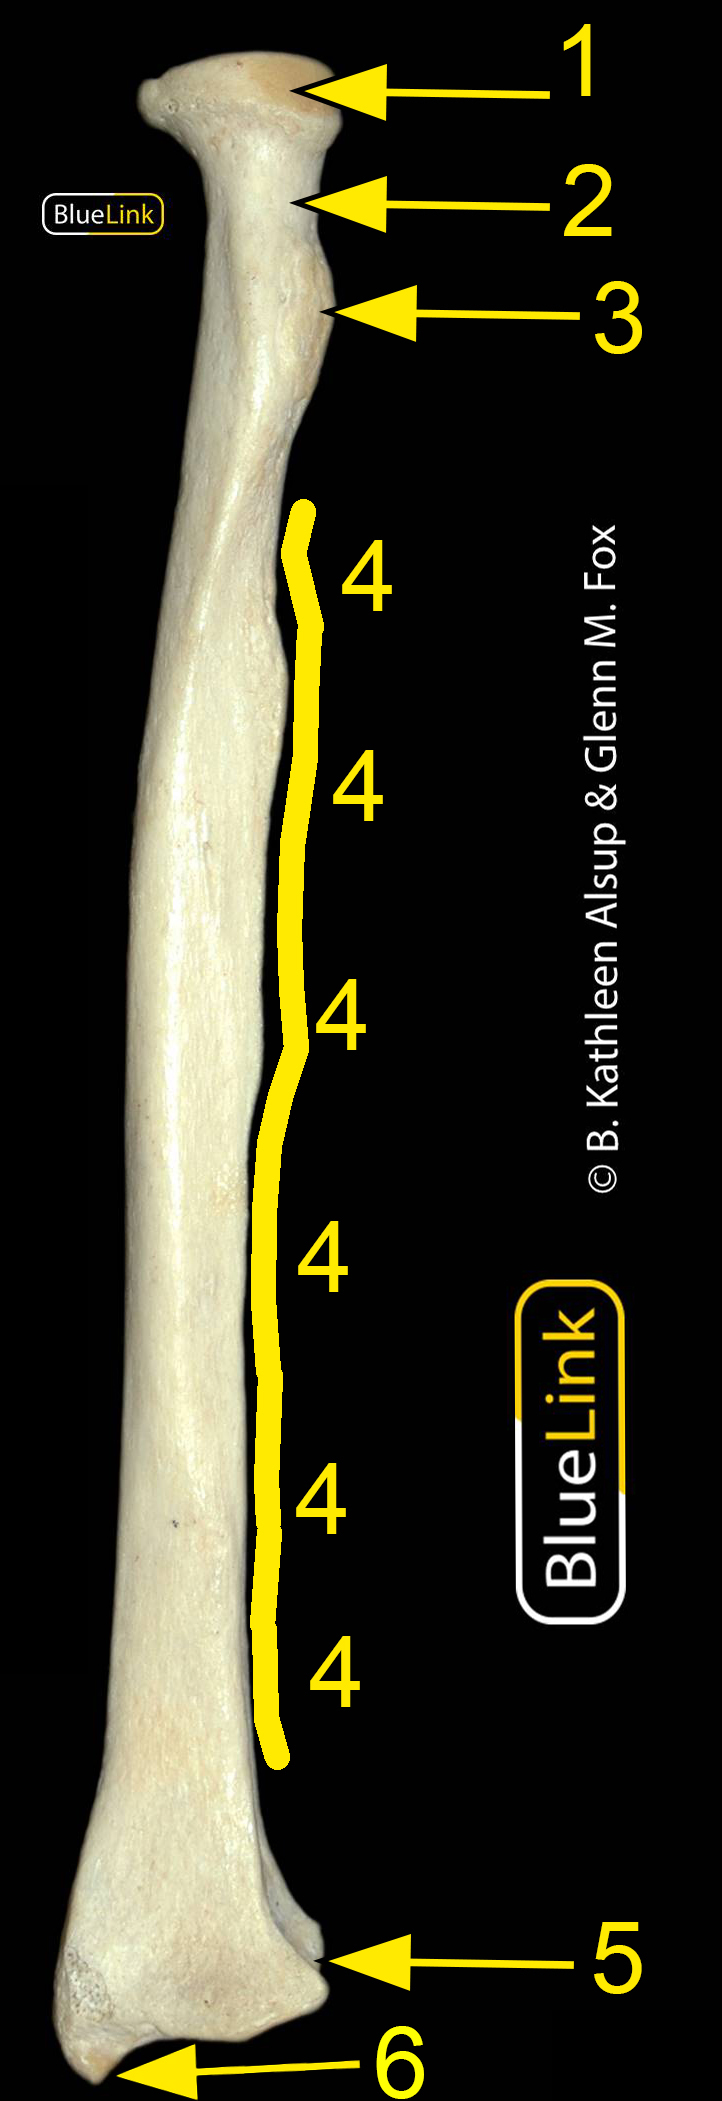 A view of the anterior radius with selected landmarks numbered.